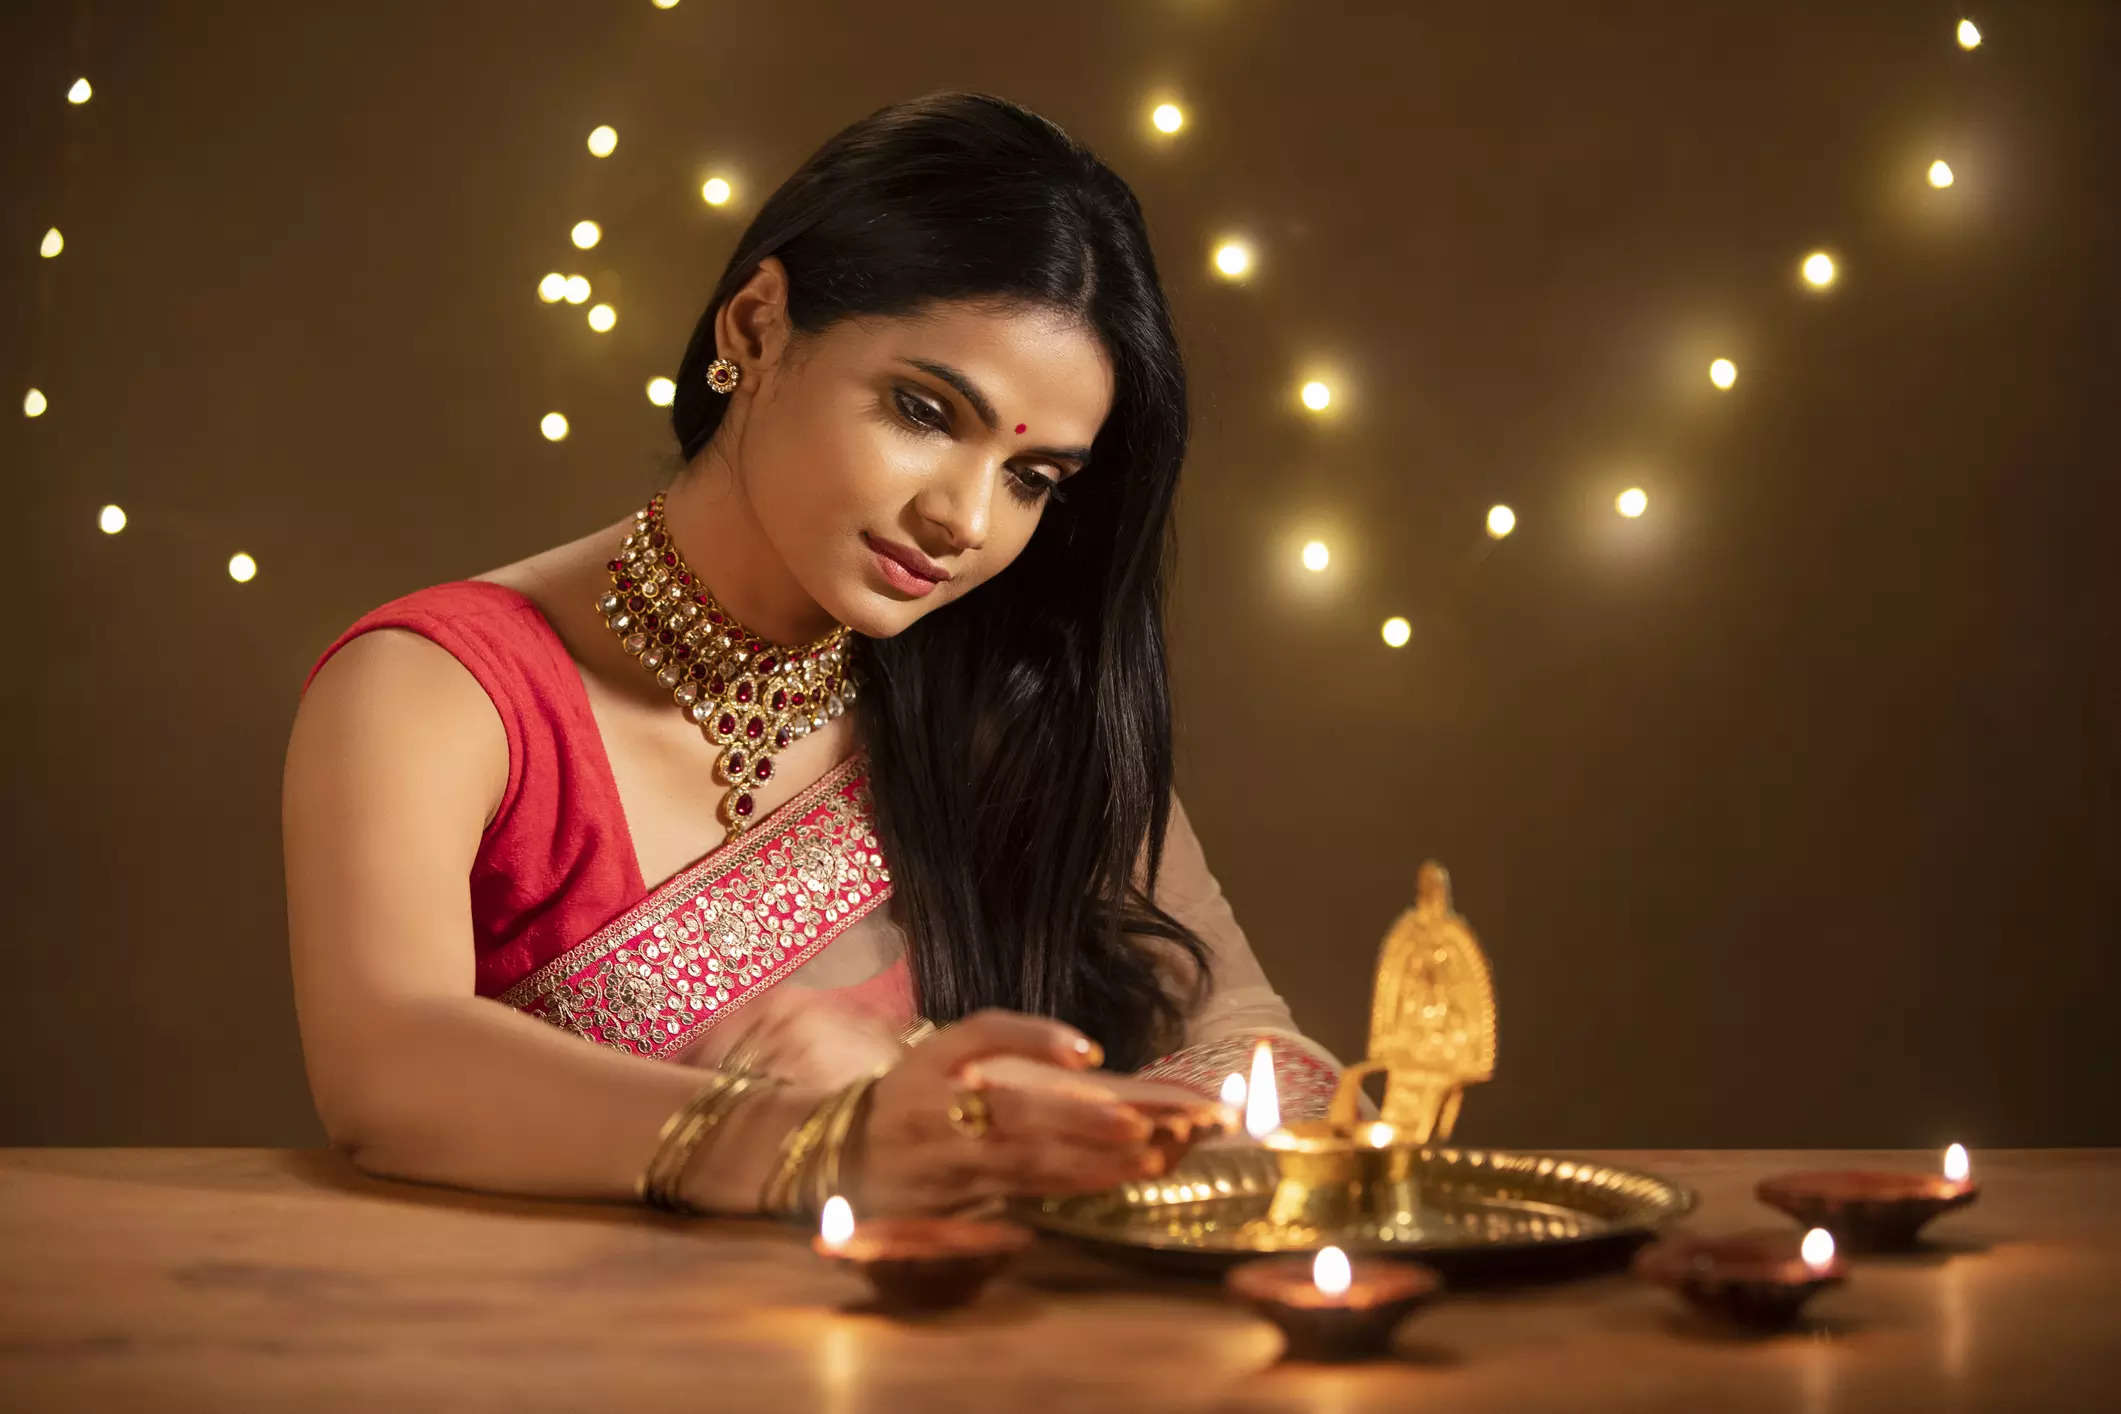 Diwali 2022 Clear the air around you with mustard oil diyas know the benefits of lighting lamps in the festival of light